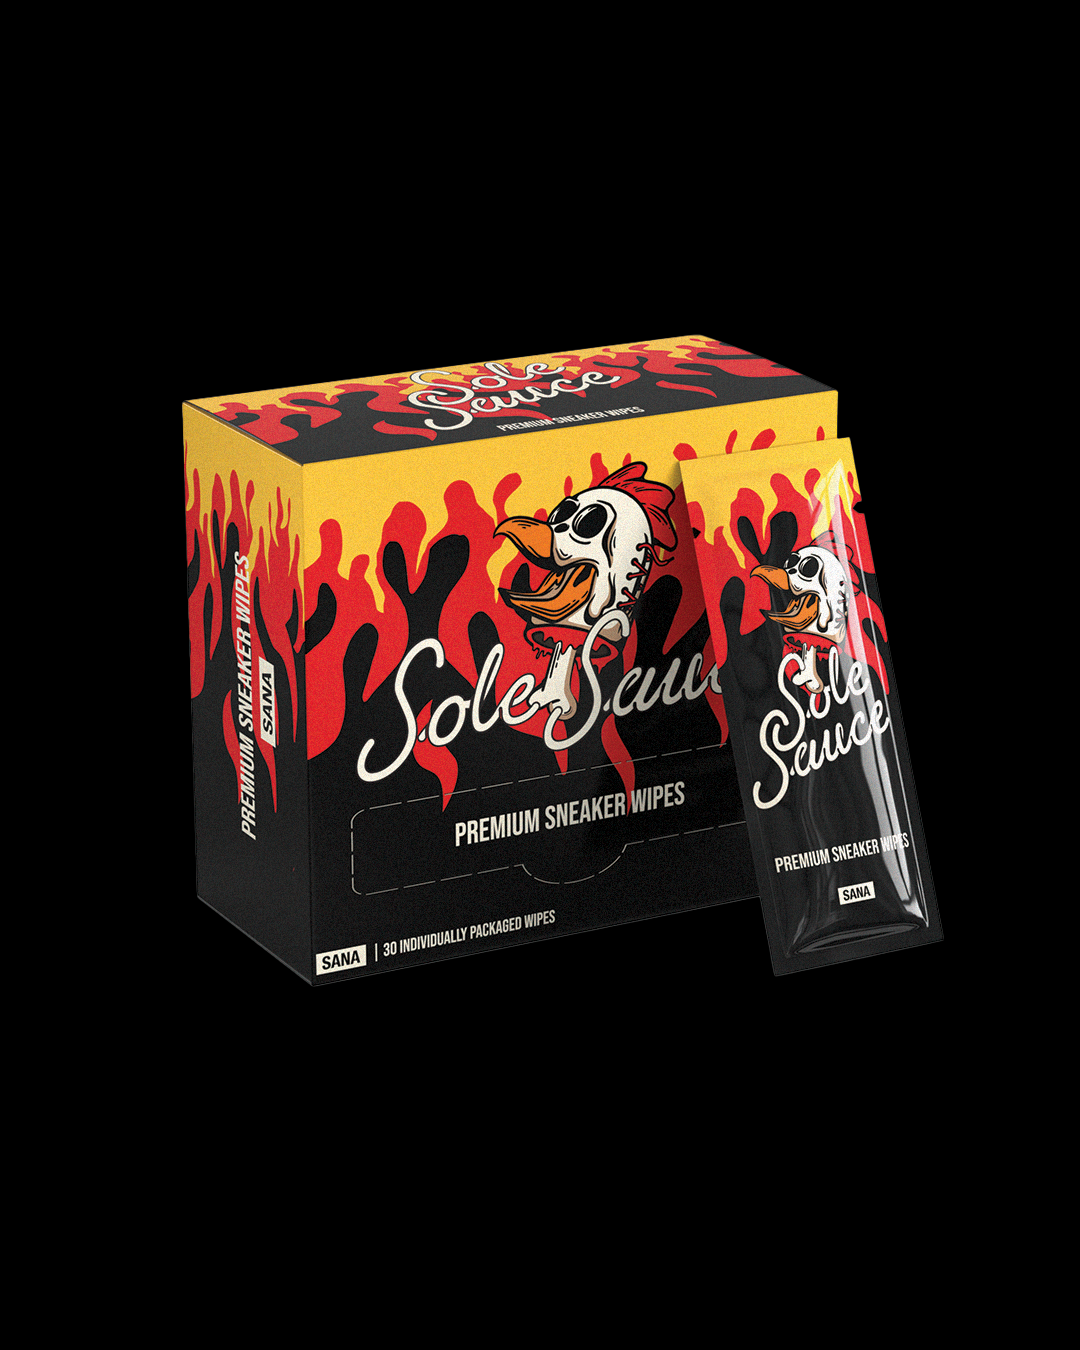 SOLE SAUCE WIPES BOX - 30 COUNT